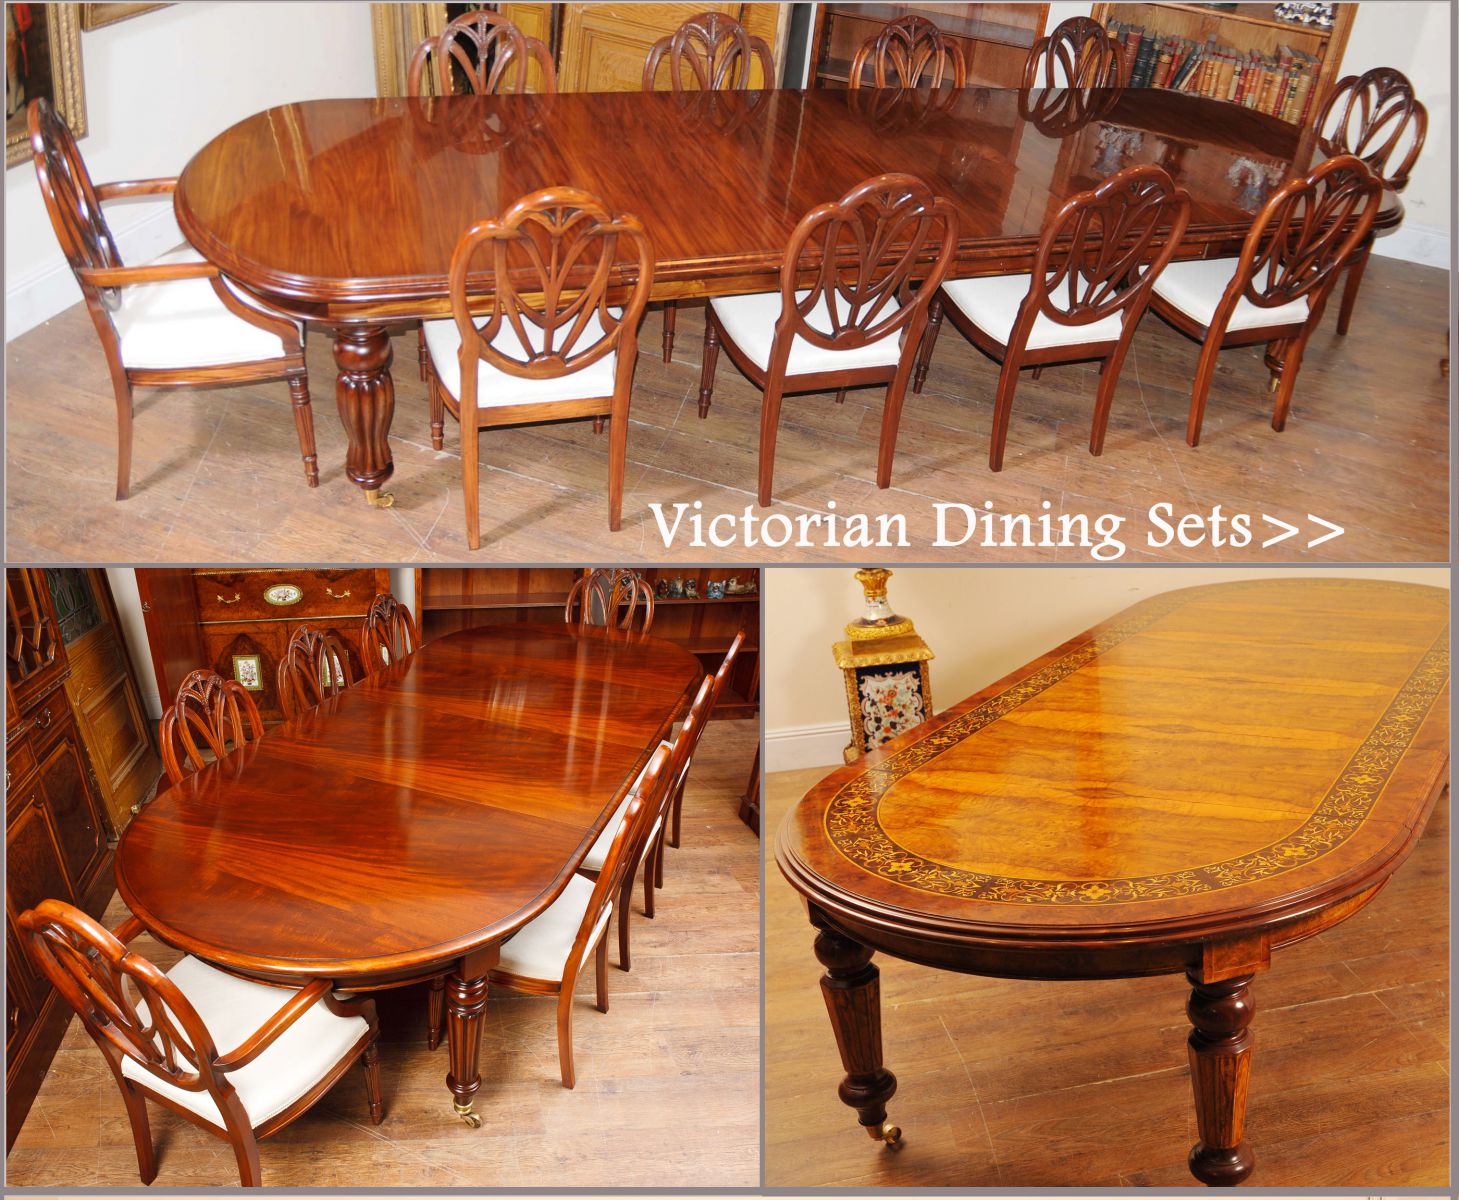 Victorian Tables and Chairs